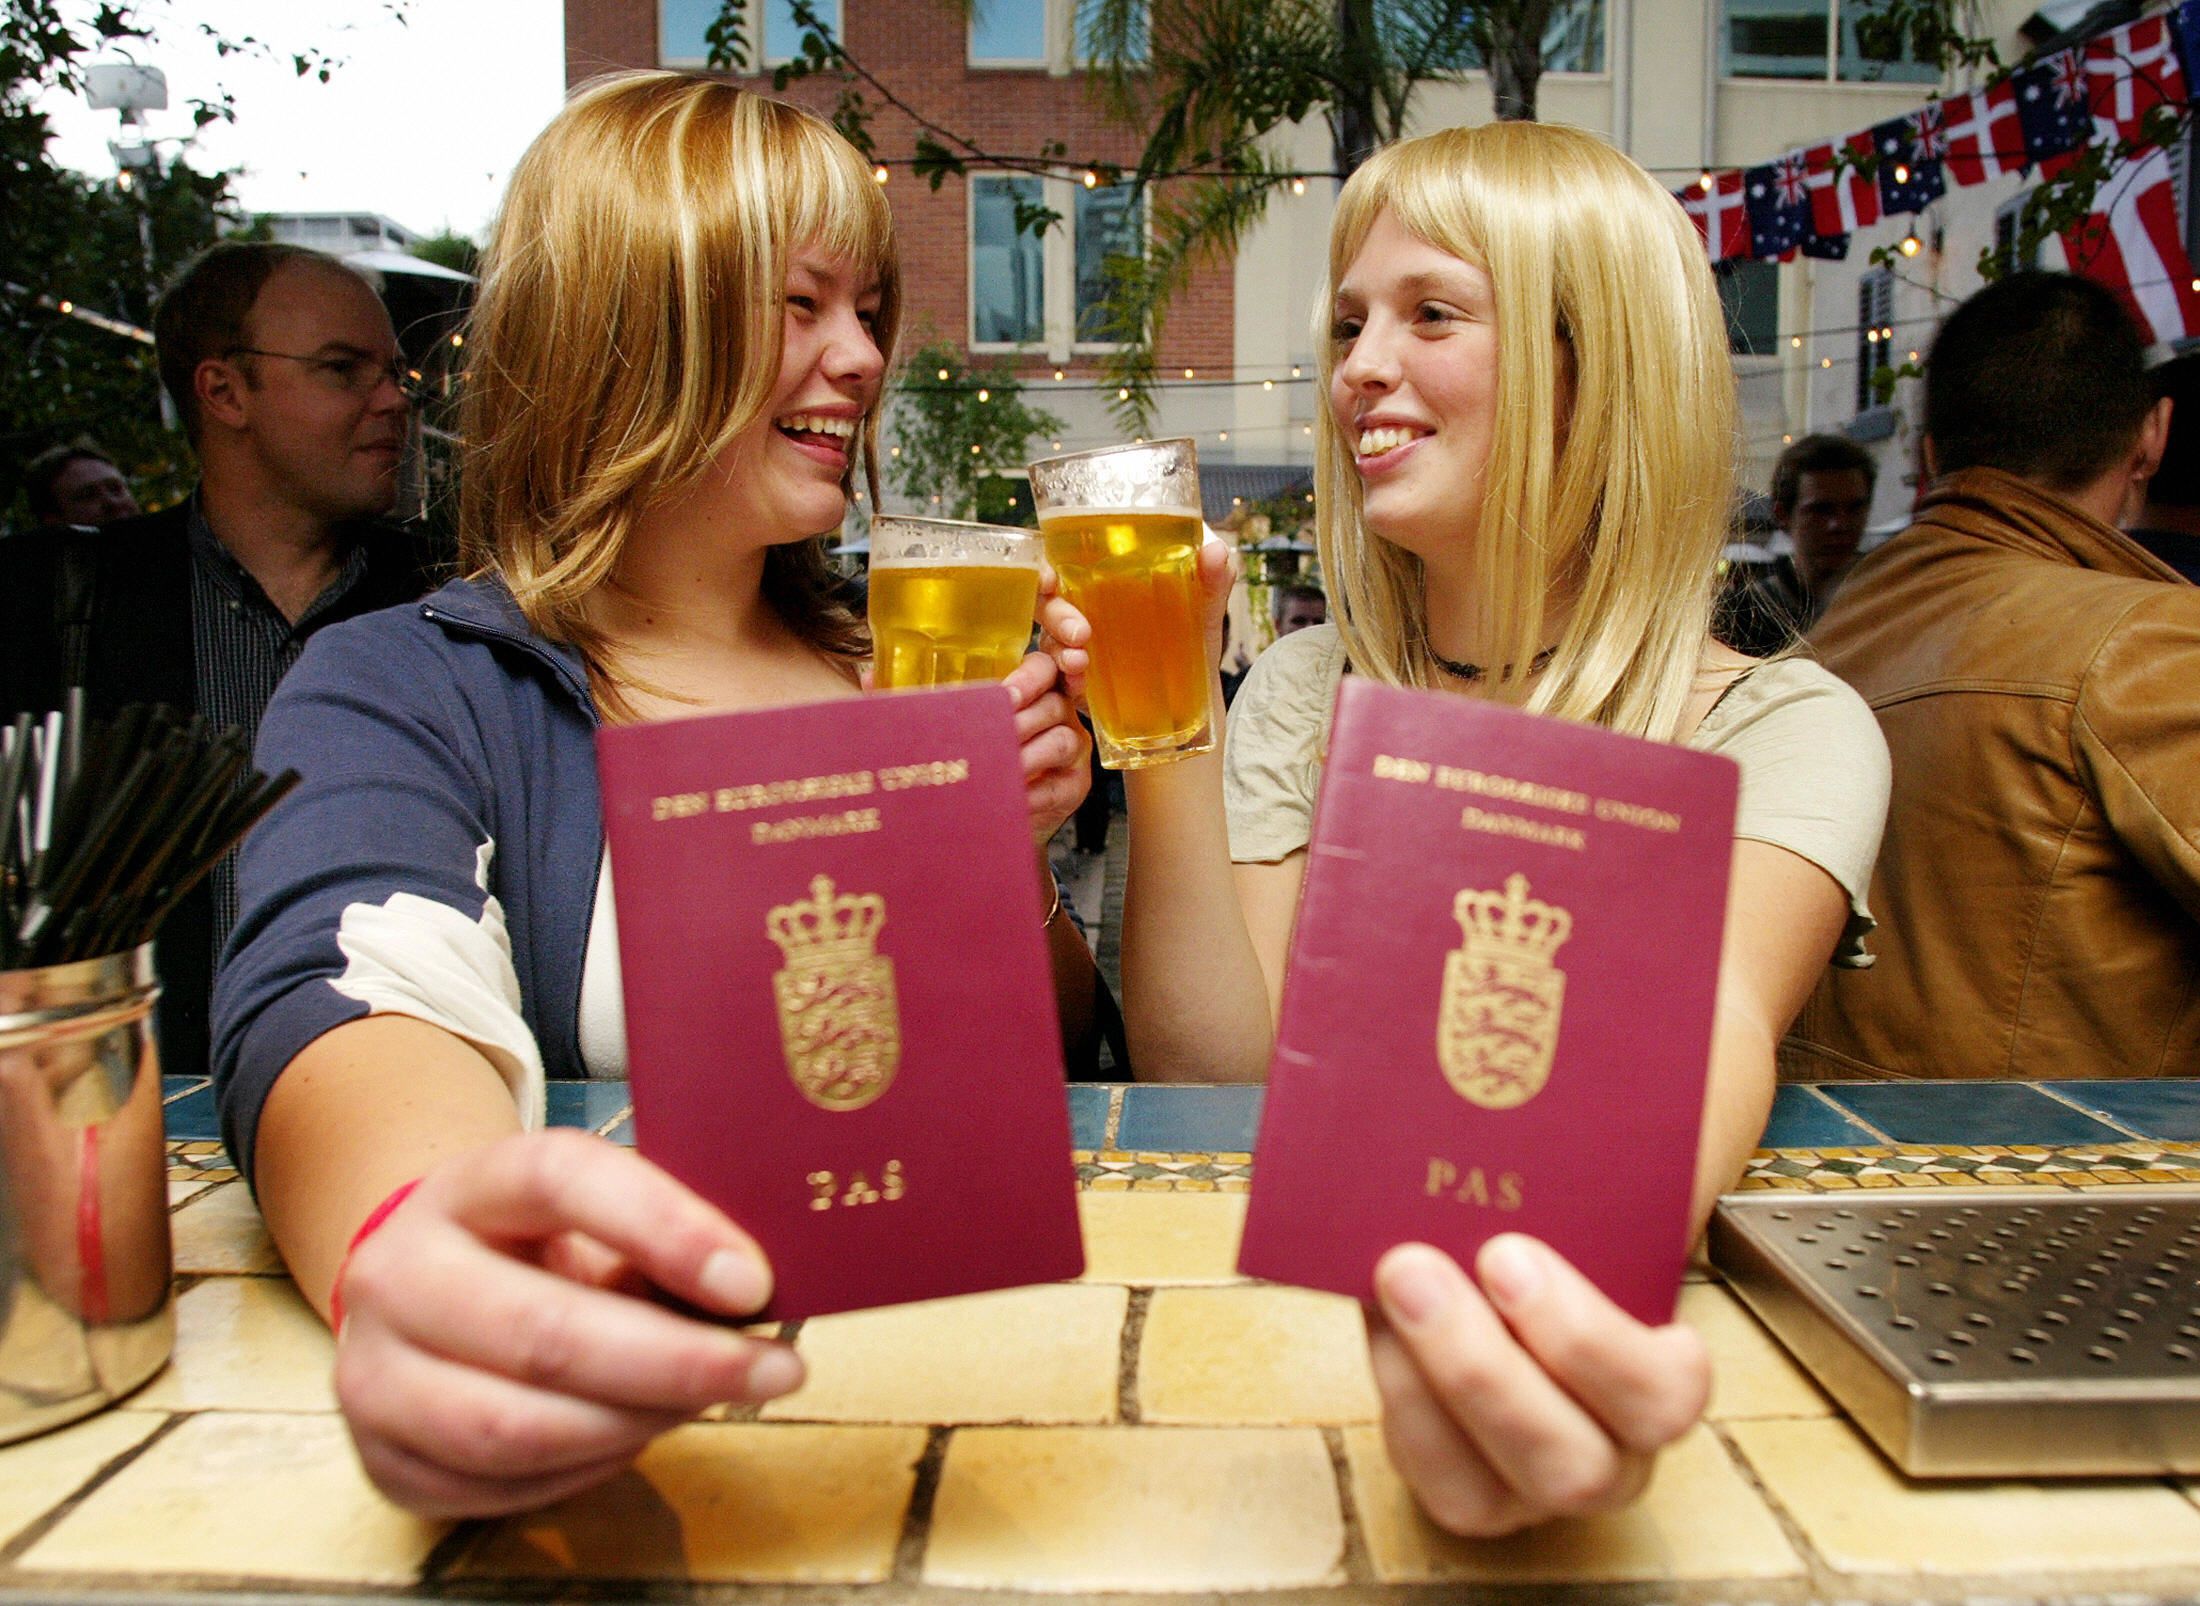 The Most Powerful Passports in the World